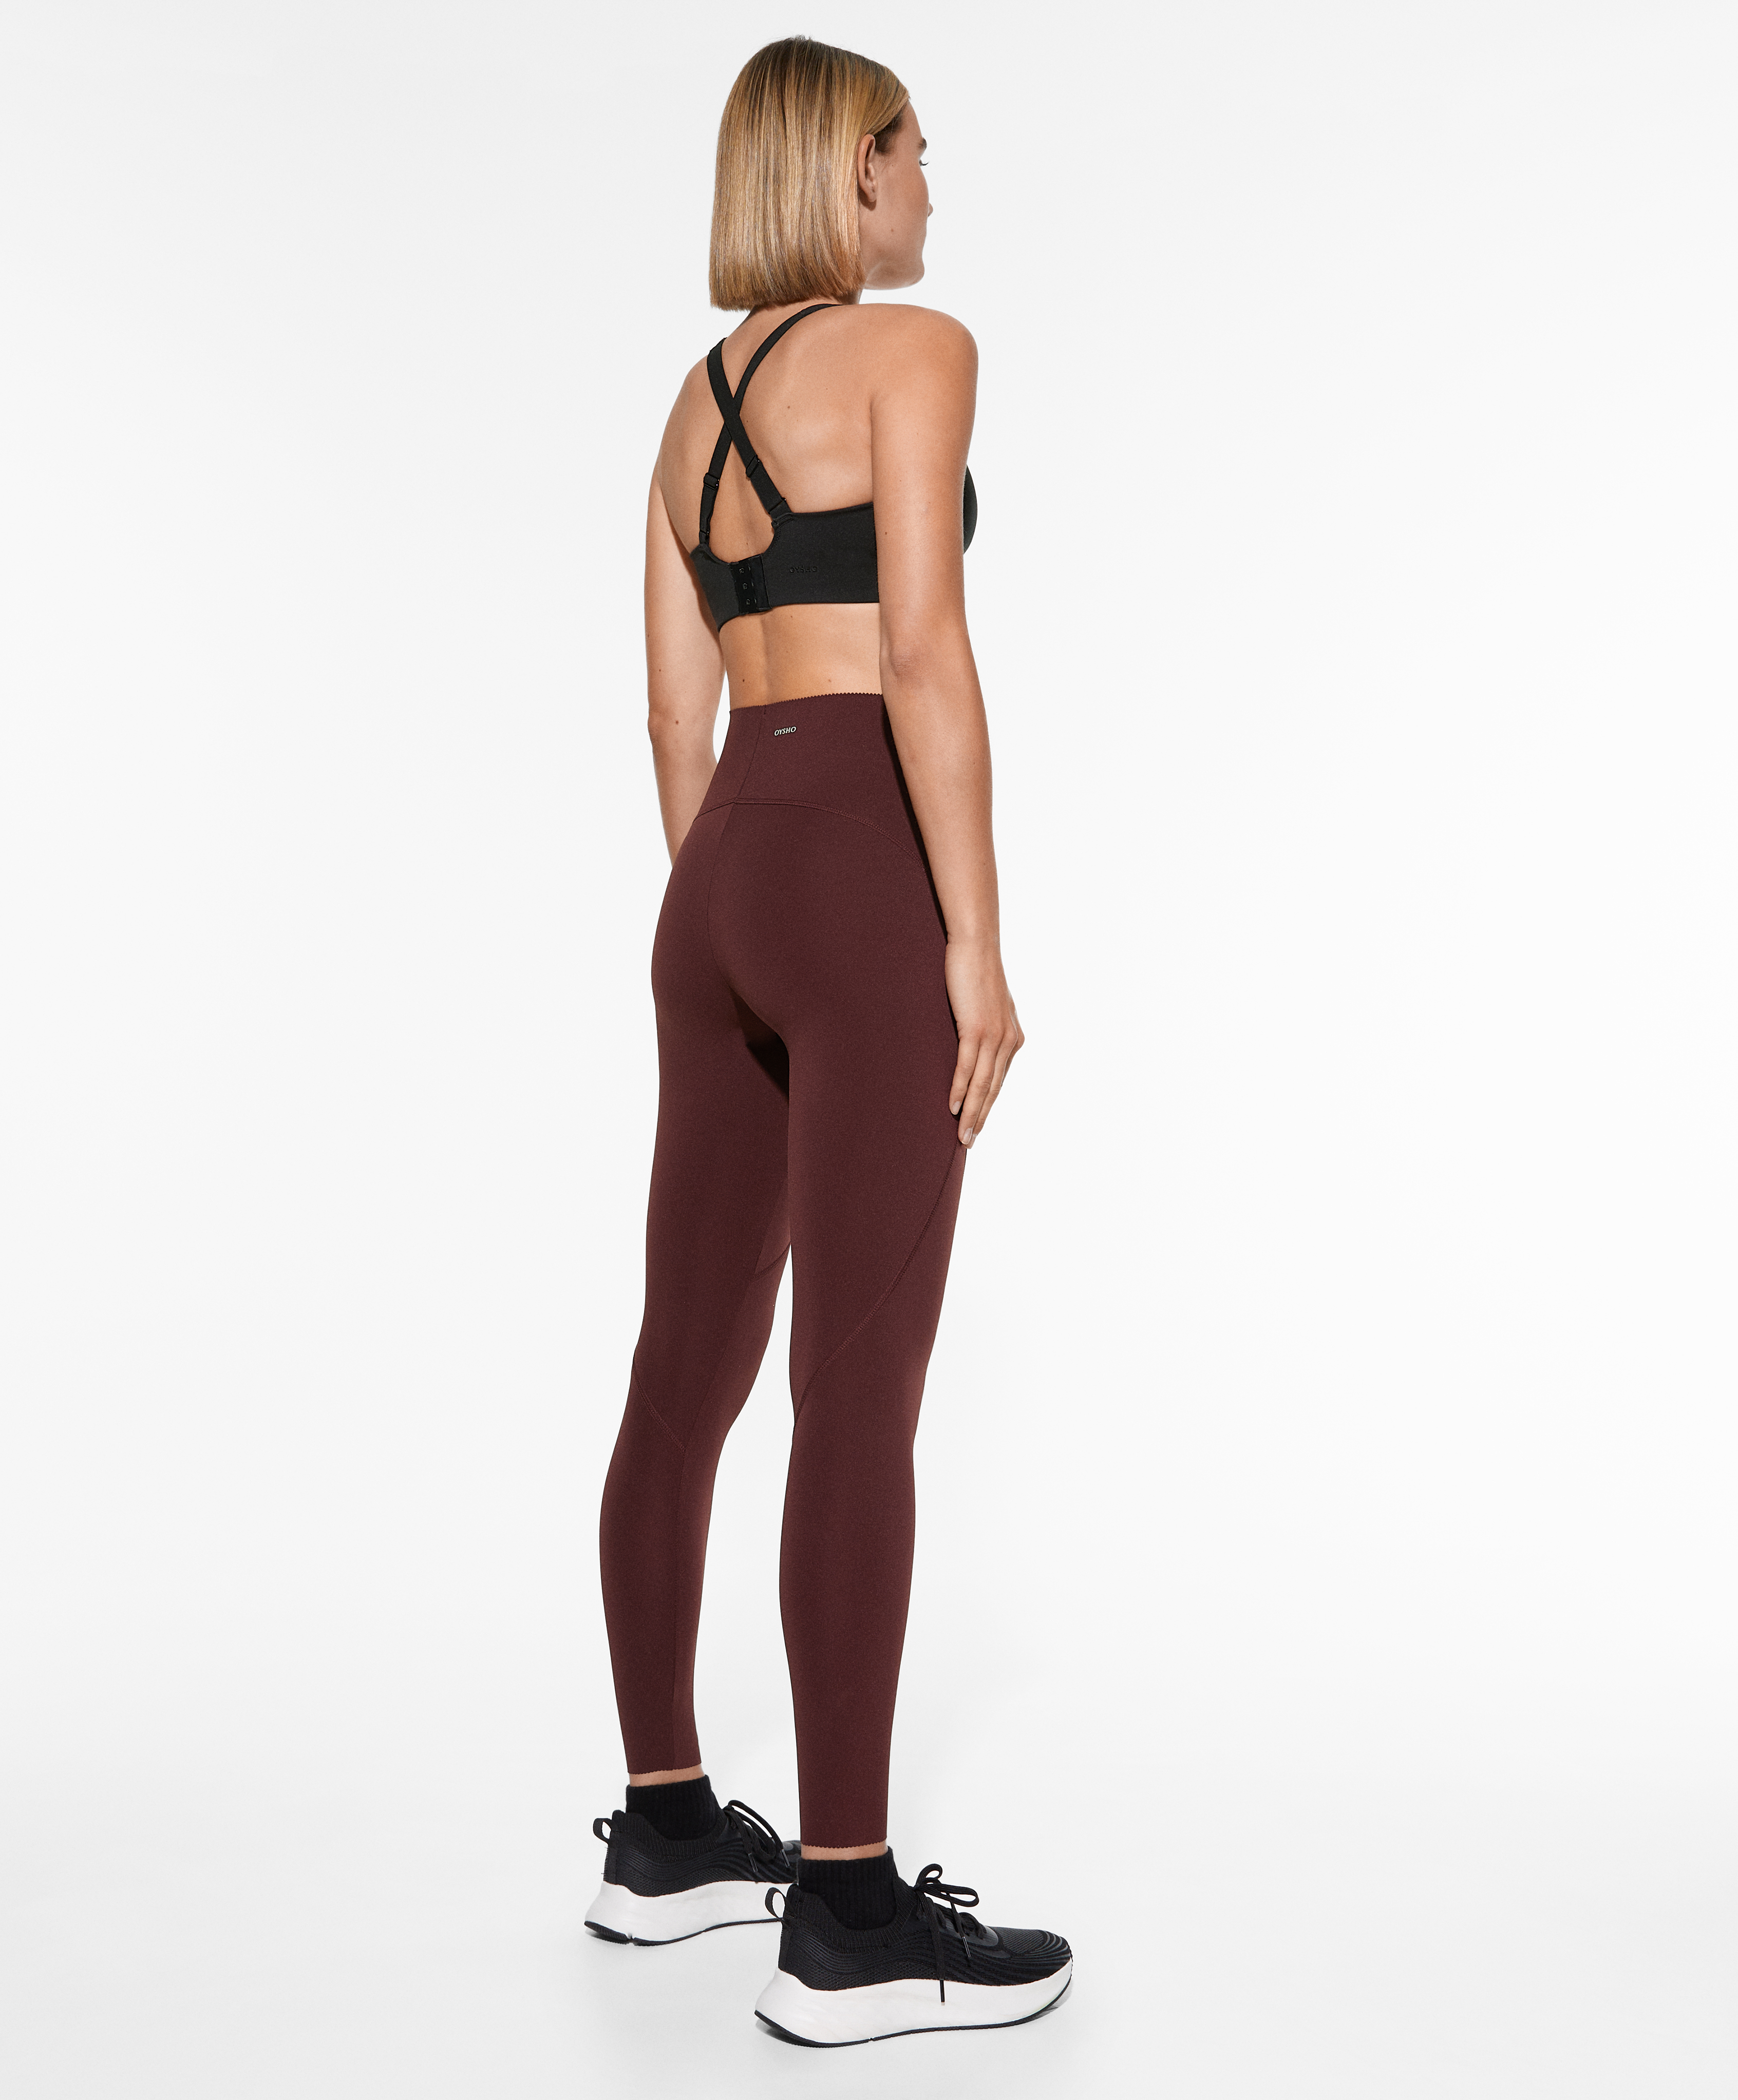 OYSHO - Meet Burgundy. Seamless fabric look which provides compression and  a shapewear effect to specific zones. Get ready for your yoga sessions.  View collection >>